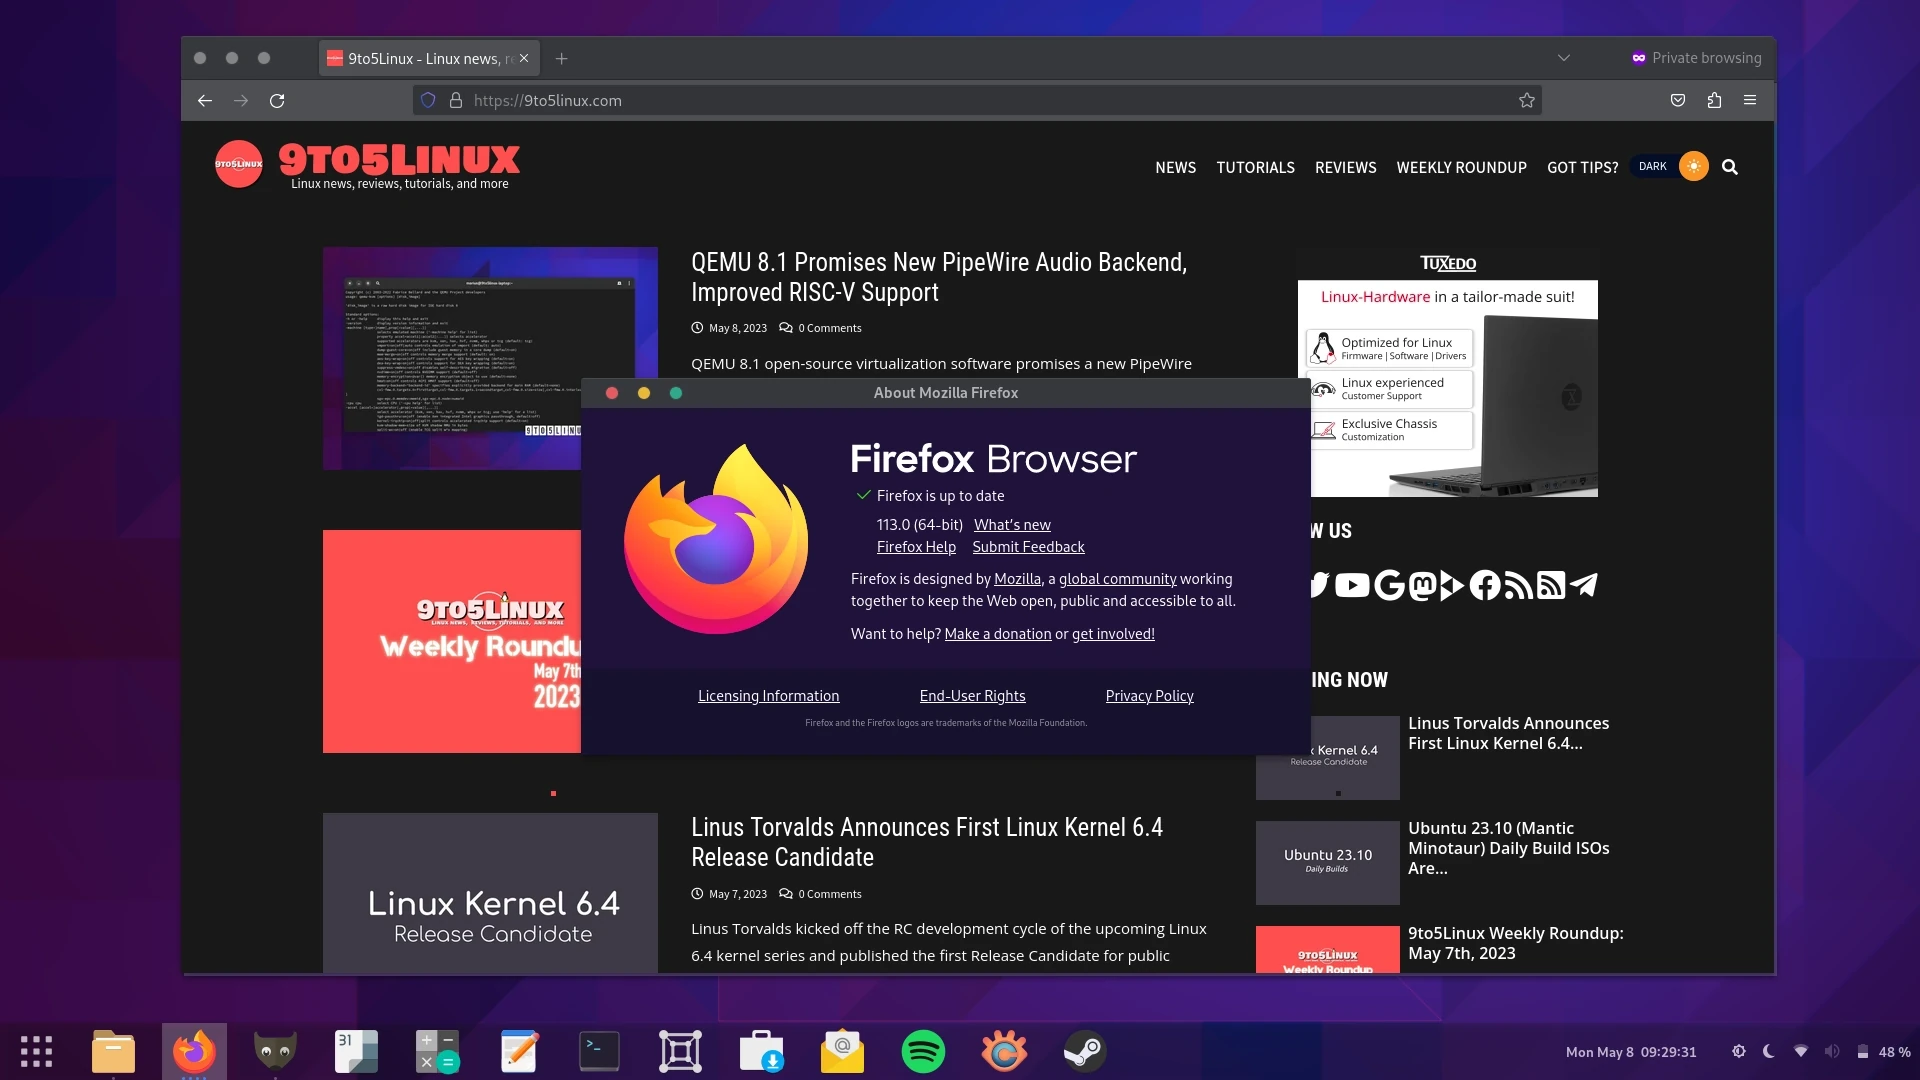 Mozilla Firefox 113 Is Now Available for Download, Here’s What’s New